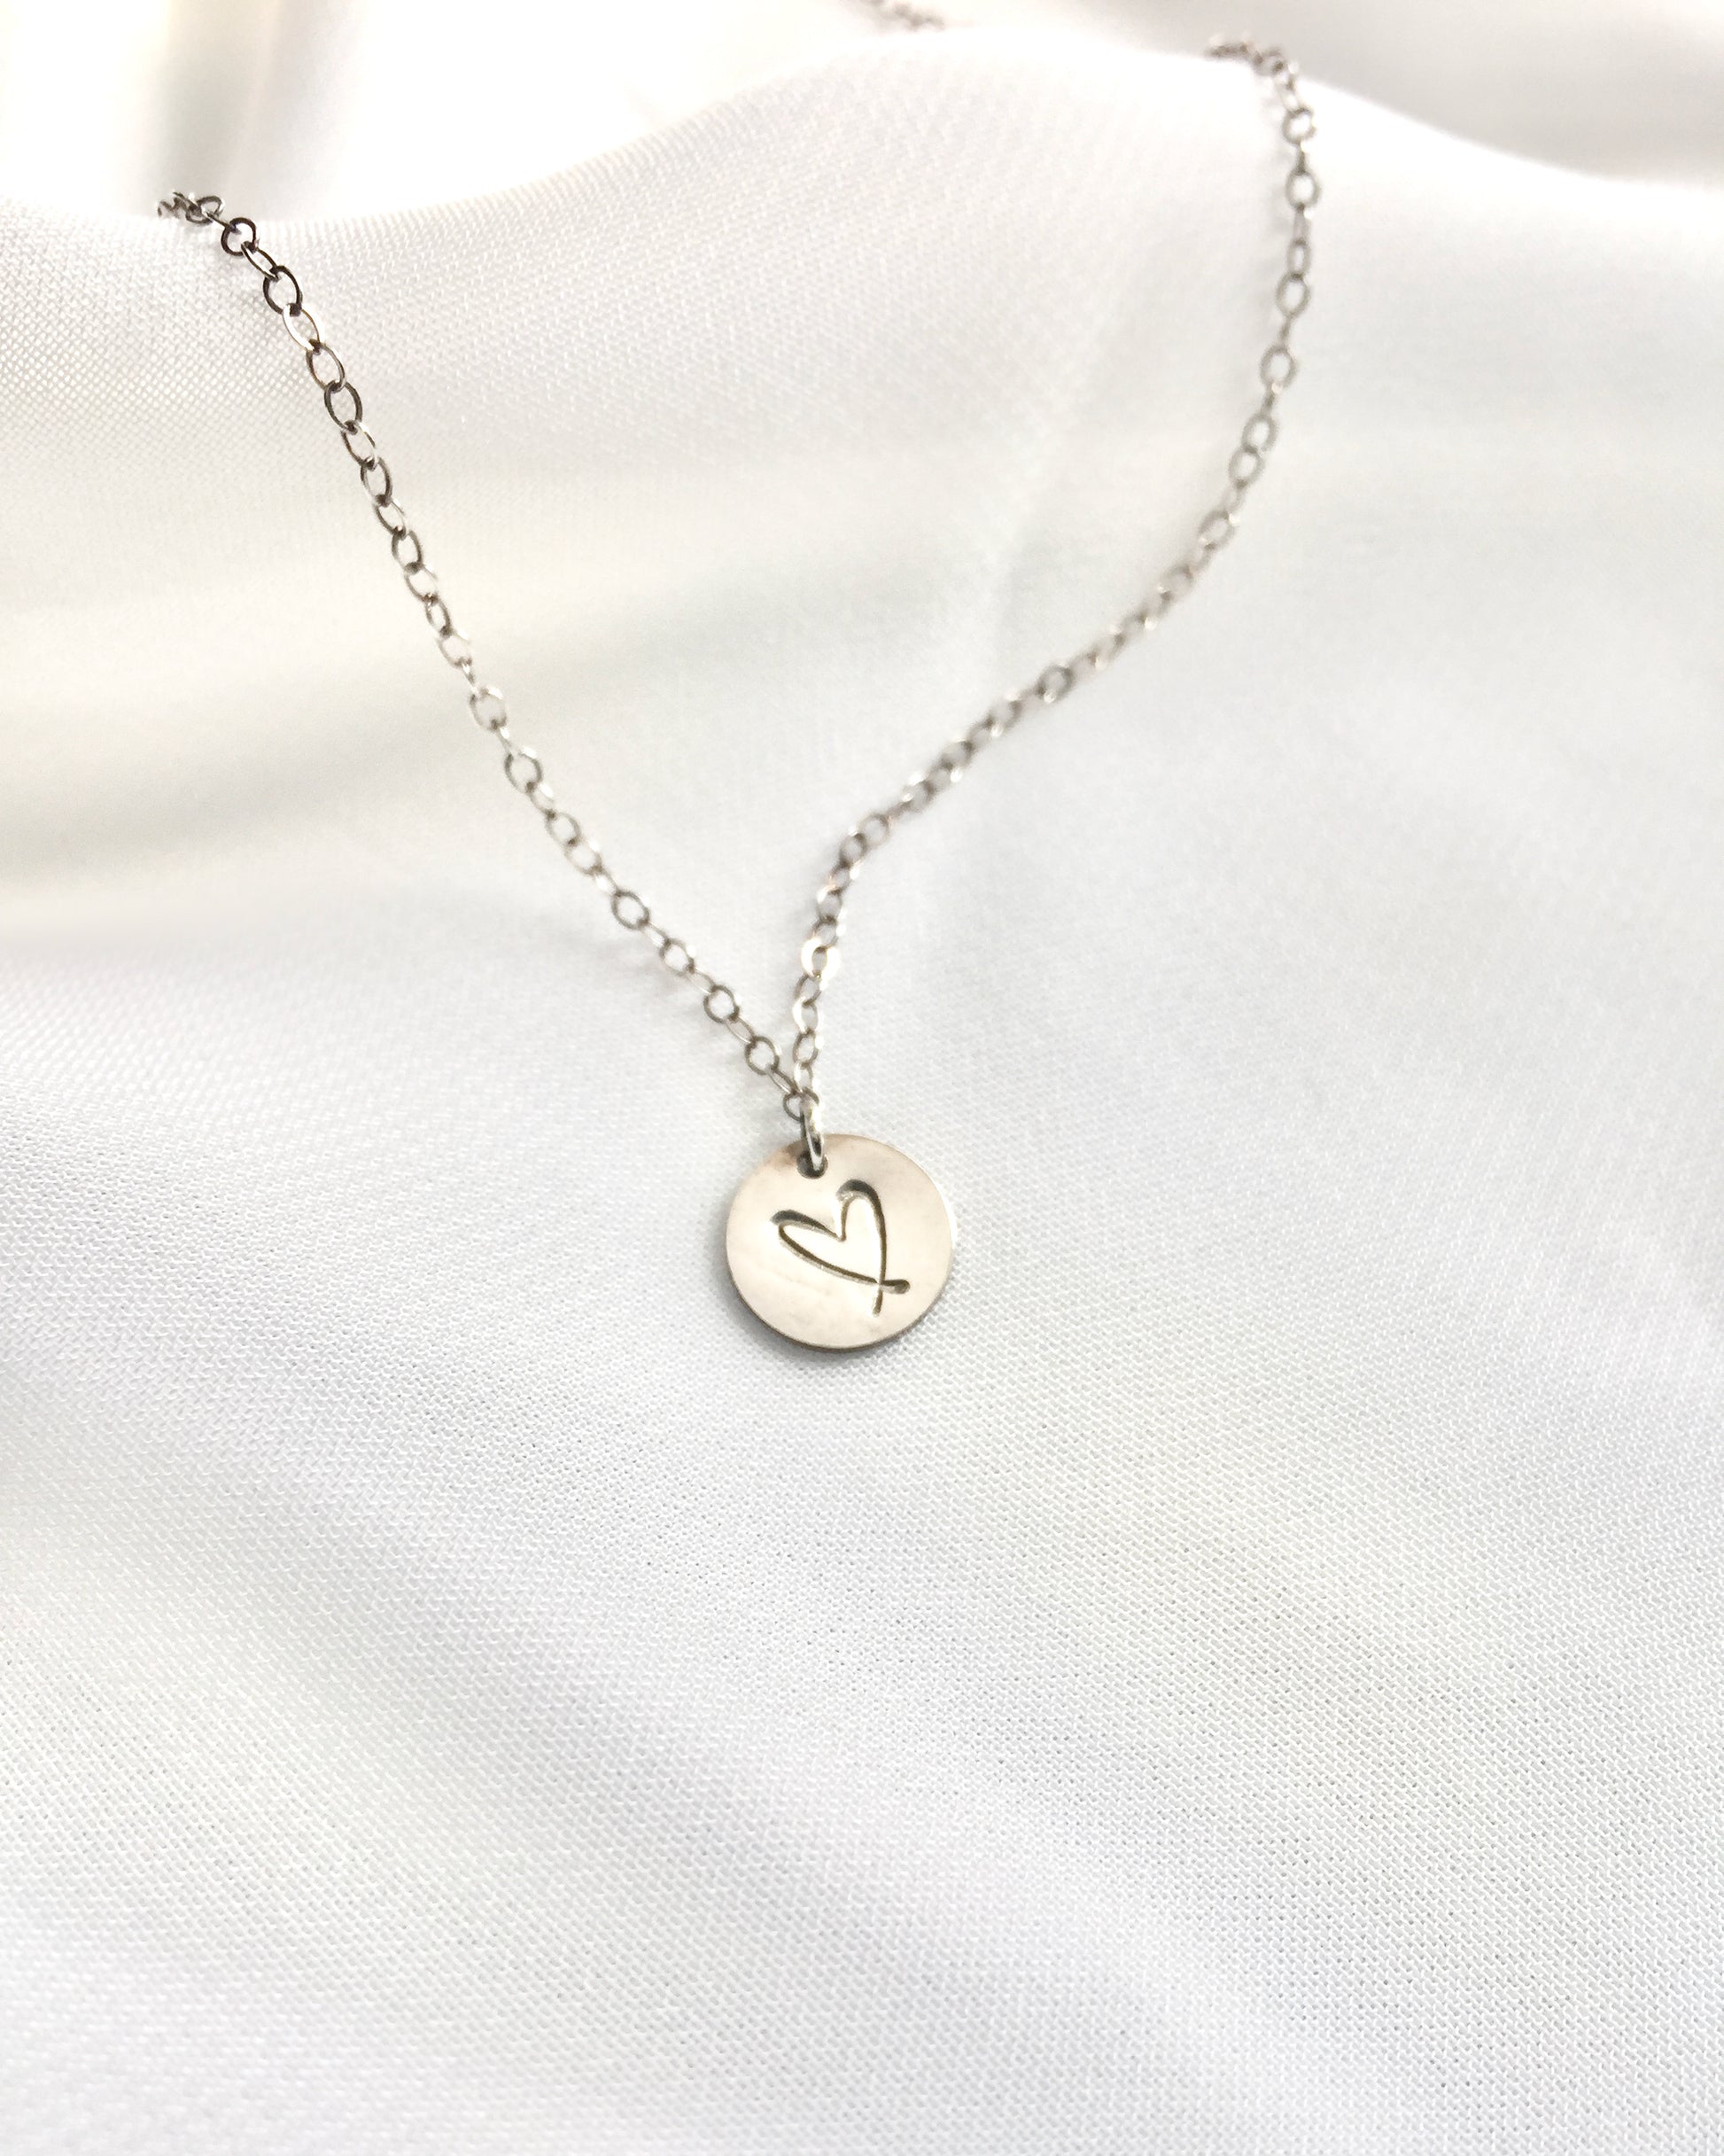 Dainty Heart Necklace | Delicate Mom Necklace in Sterling Silver or Gold Filled | Mom Meaningful Necklace | IB Jewelry